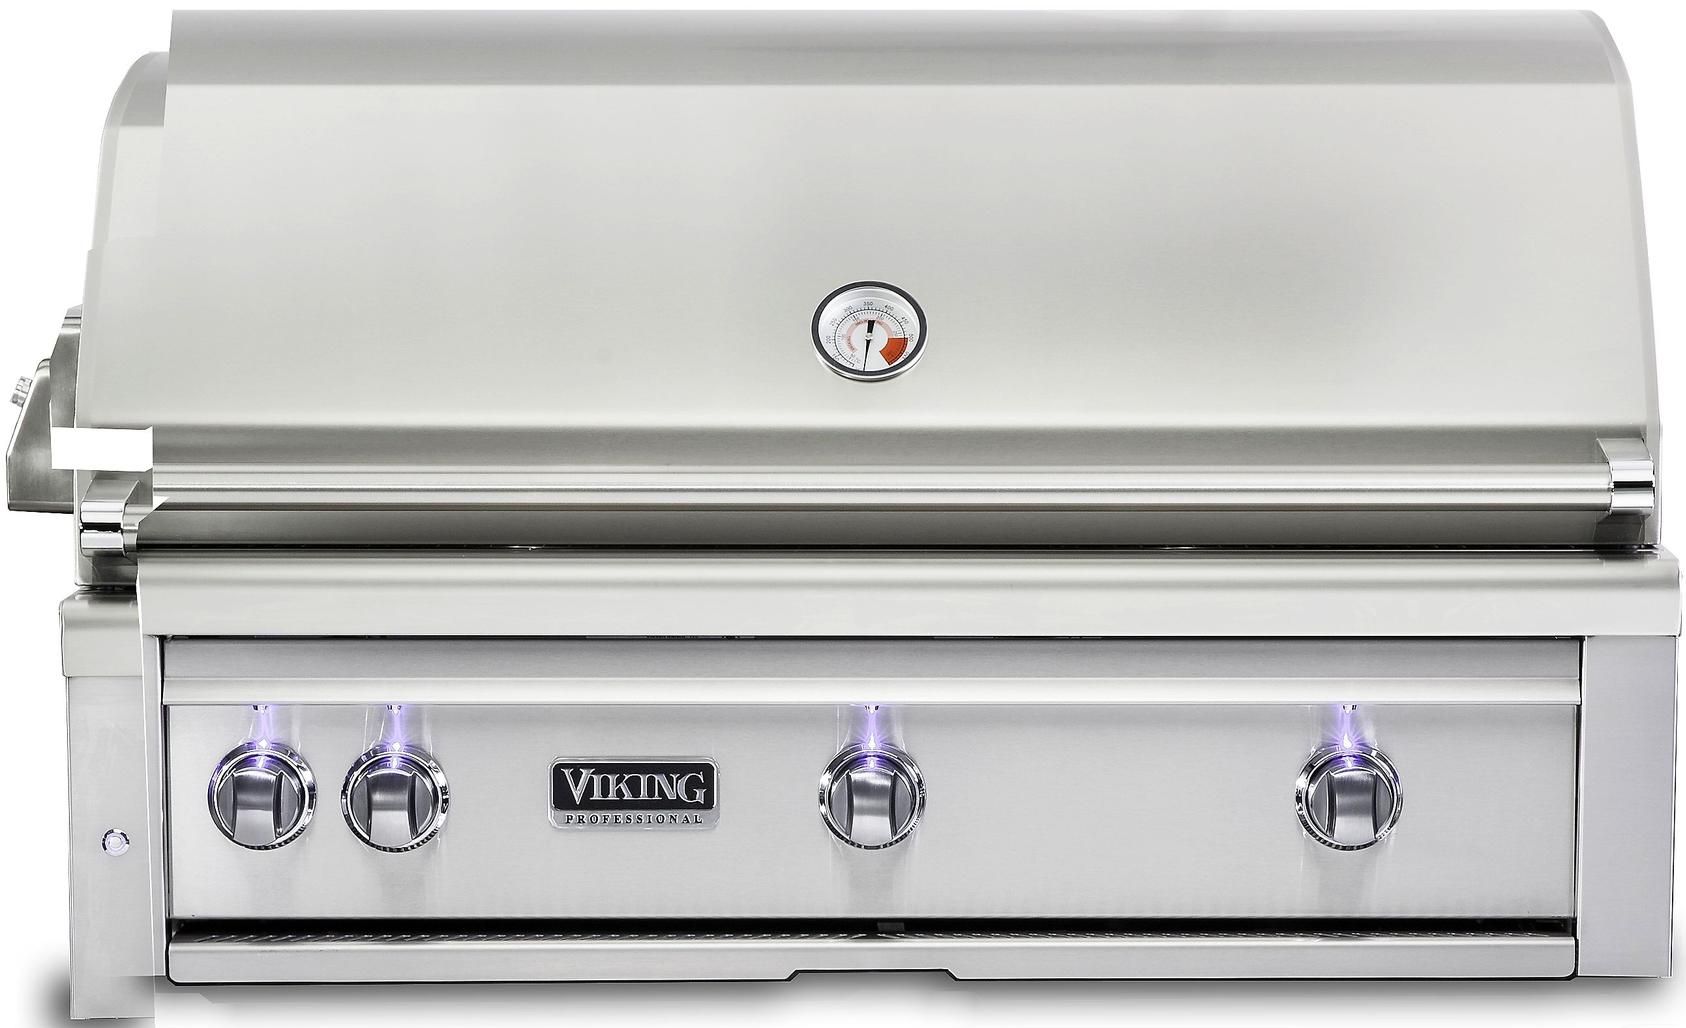 Viking® Professional 5 Series 42" Stainless Steel Built-In Liquid Propane Grill